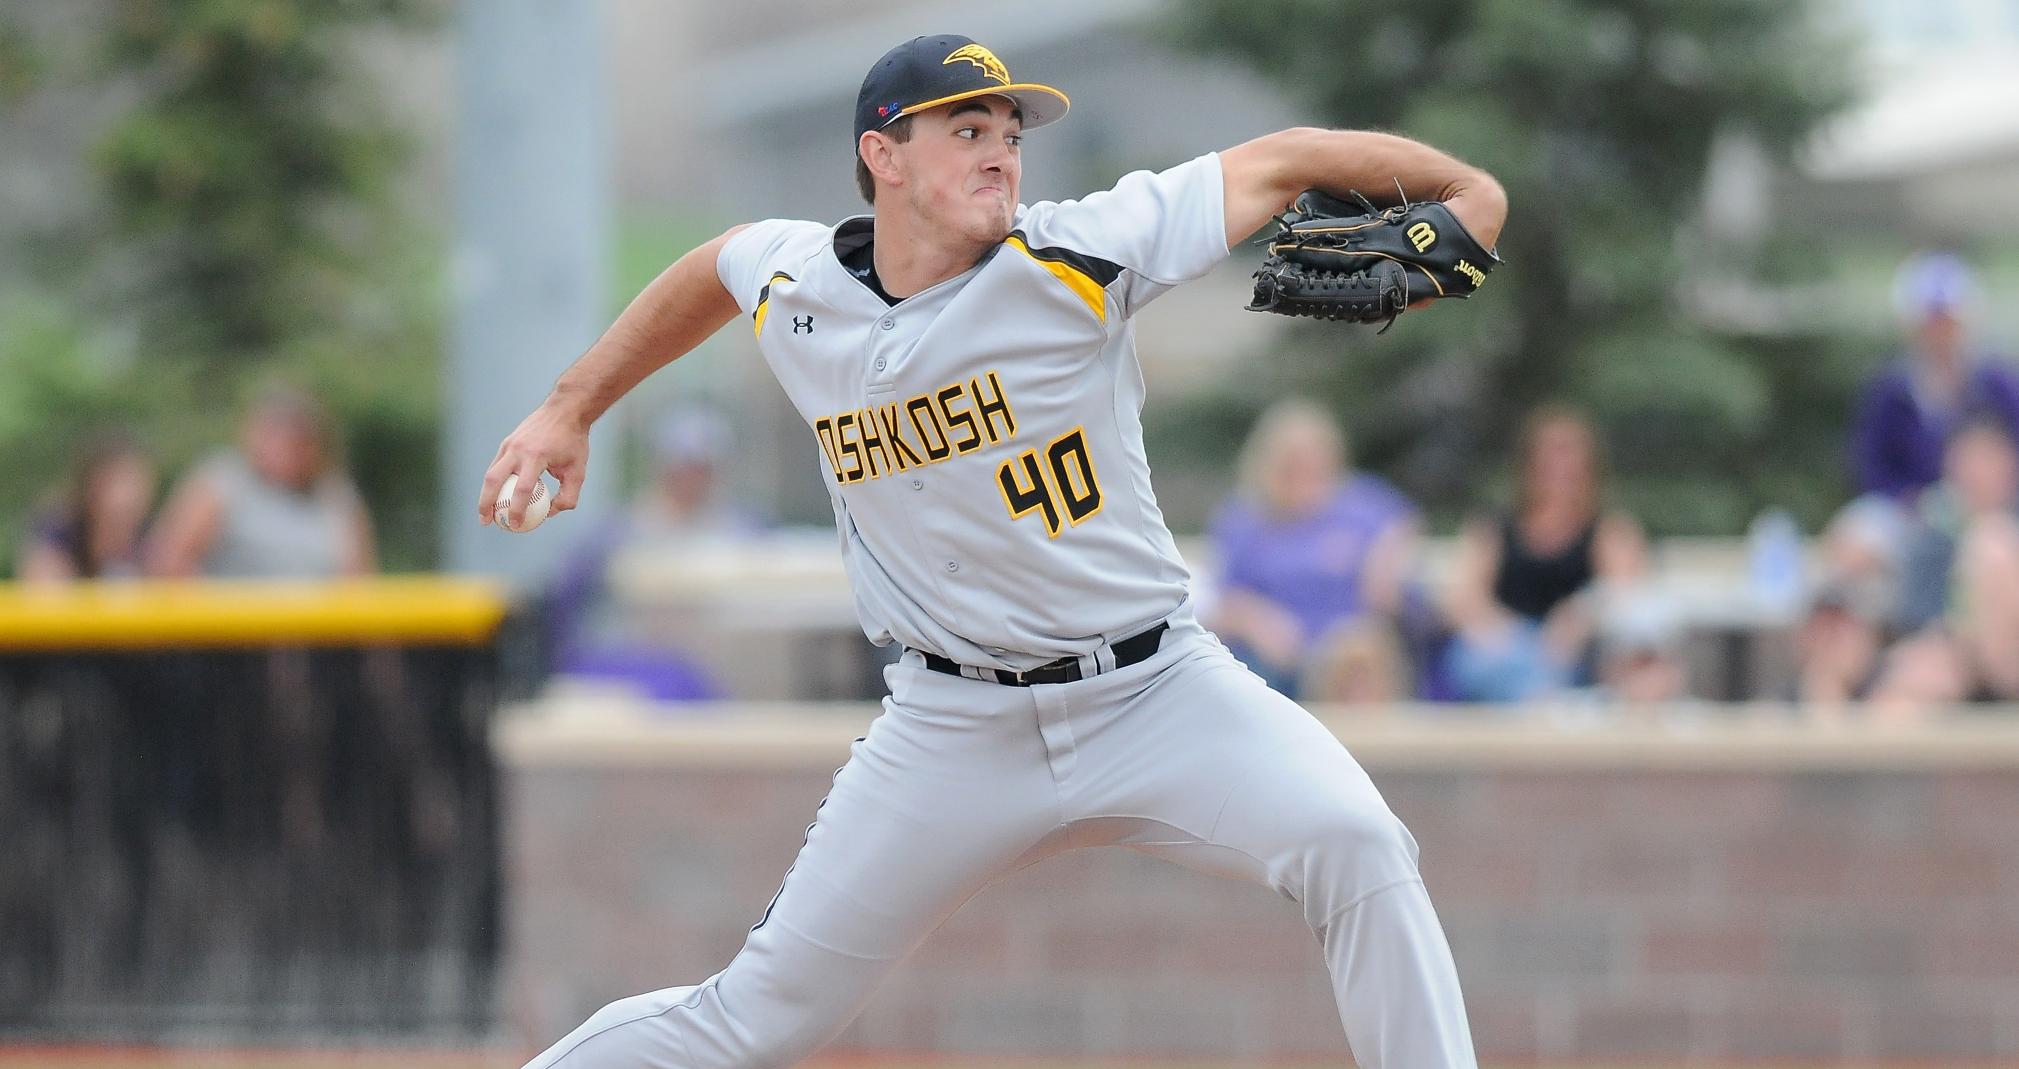 Scott Gorsuch pitched 2.2 scoreless innings to earn the win against the third-ranked Warhawks.